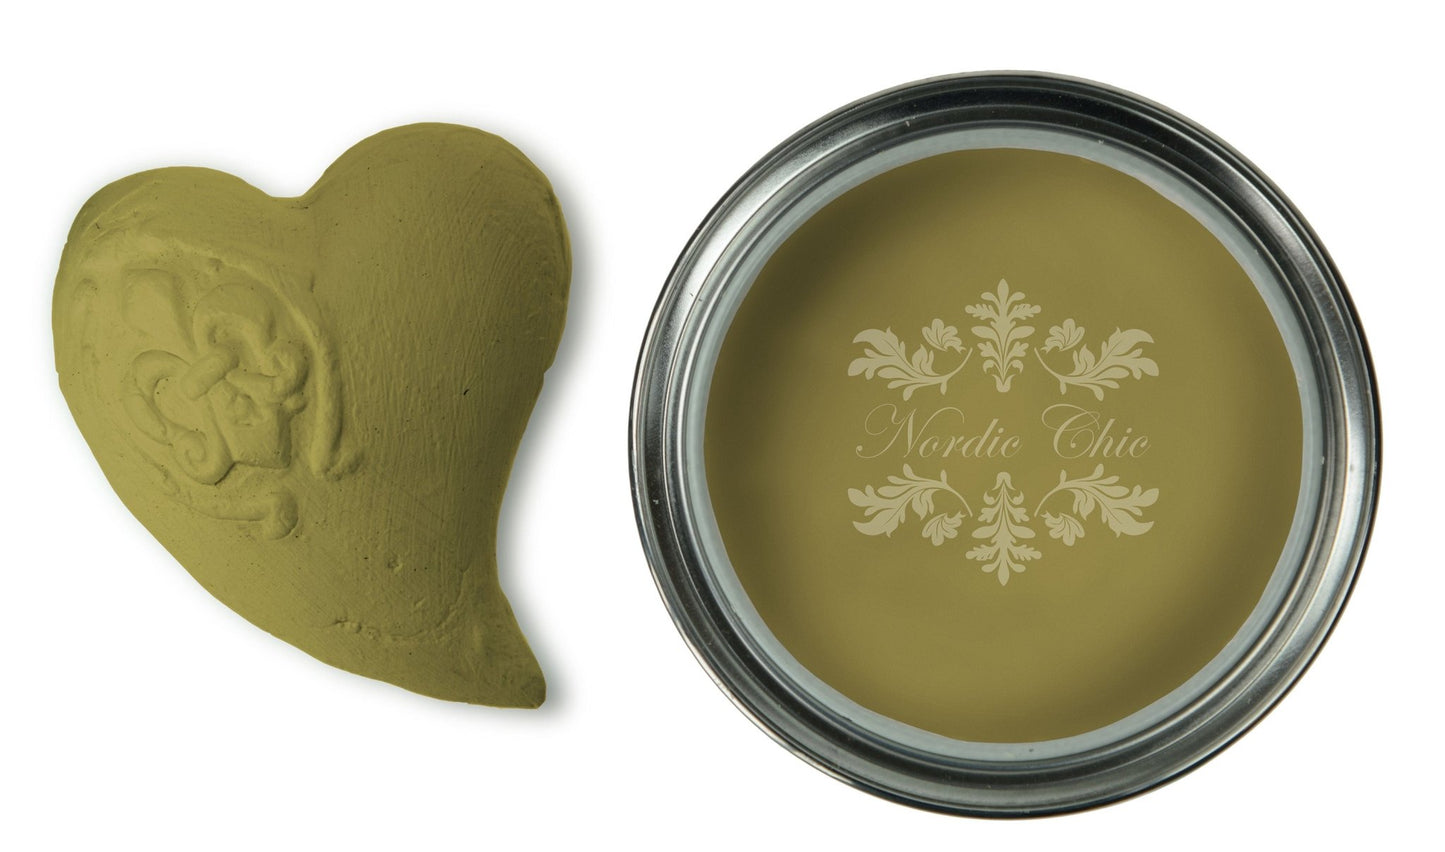 Nordic Chic Furniture Paint - Olive - Nordic Chic®